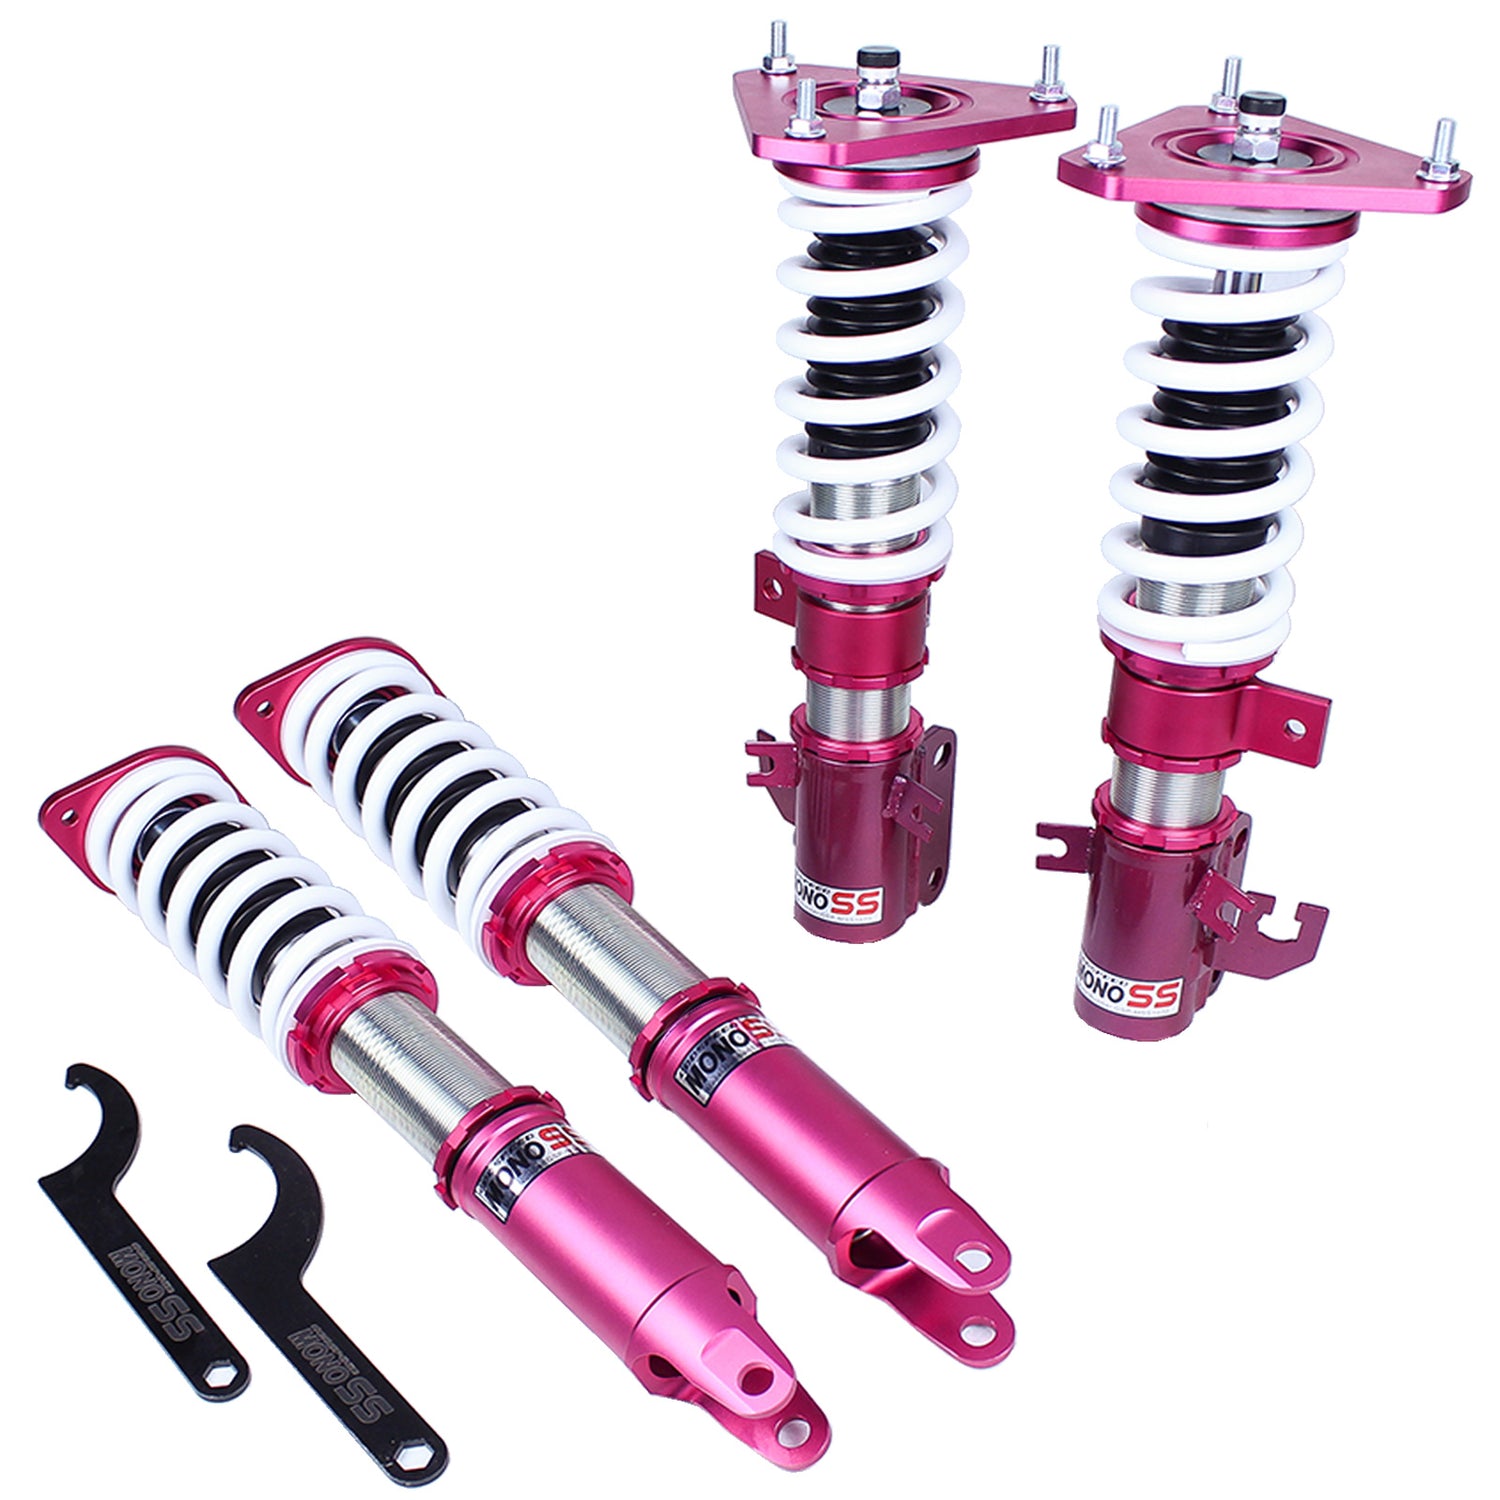 Godspeed MSS1070-D MonoSS Coilover Lowering Kit, Fully Adjustable, Ride Height, Spring Tension And 16 Click Damping, Nissan Altima(L33) 2013-18